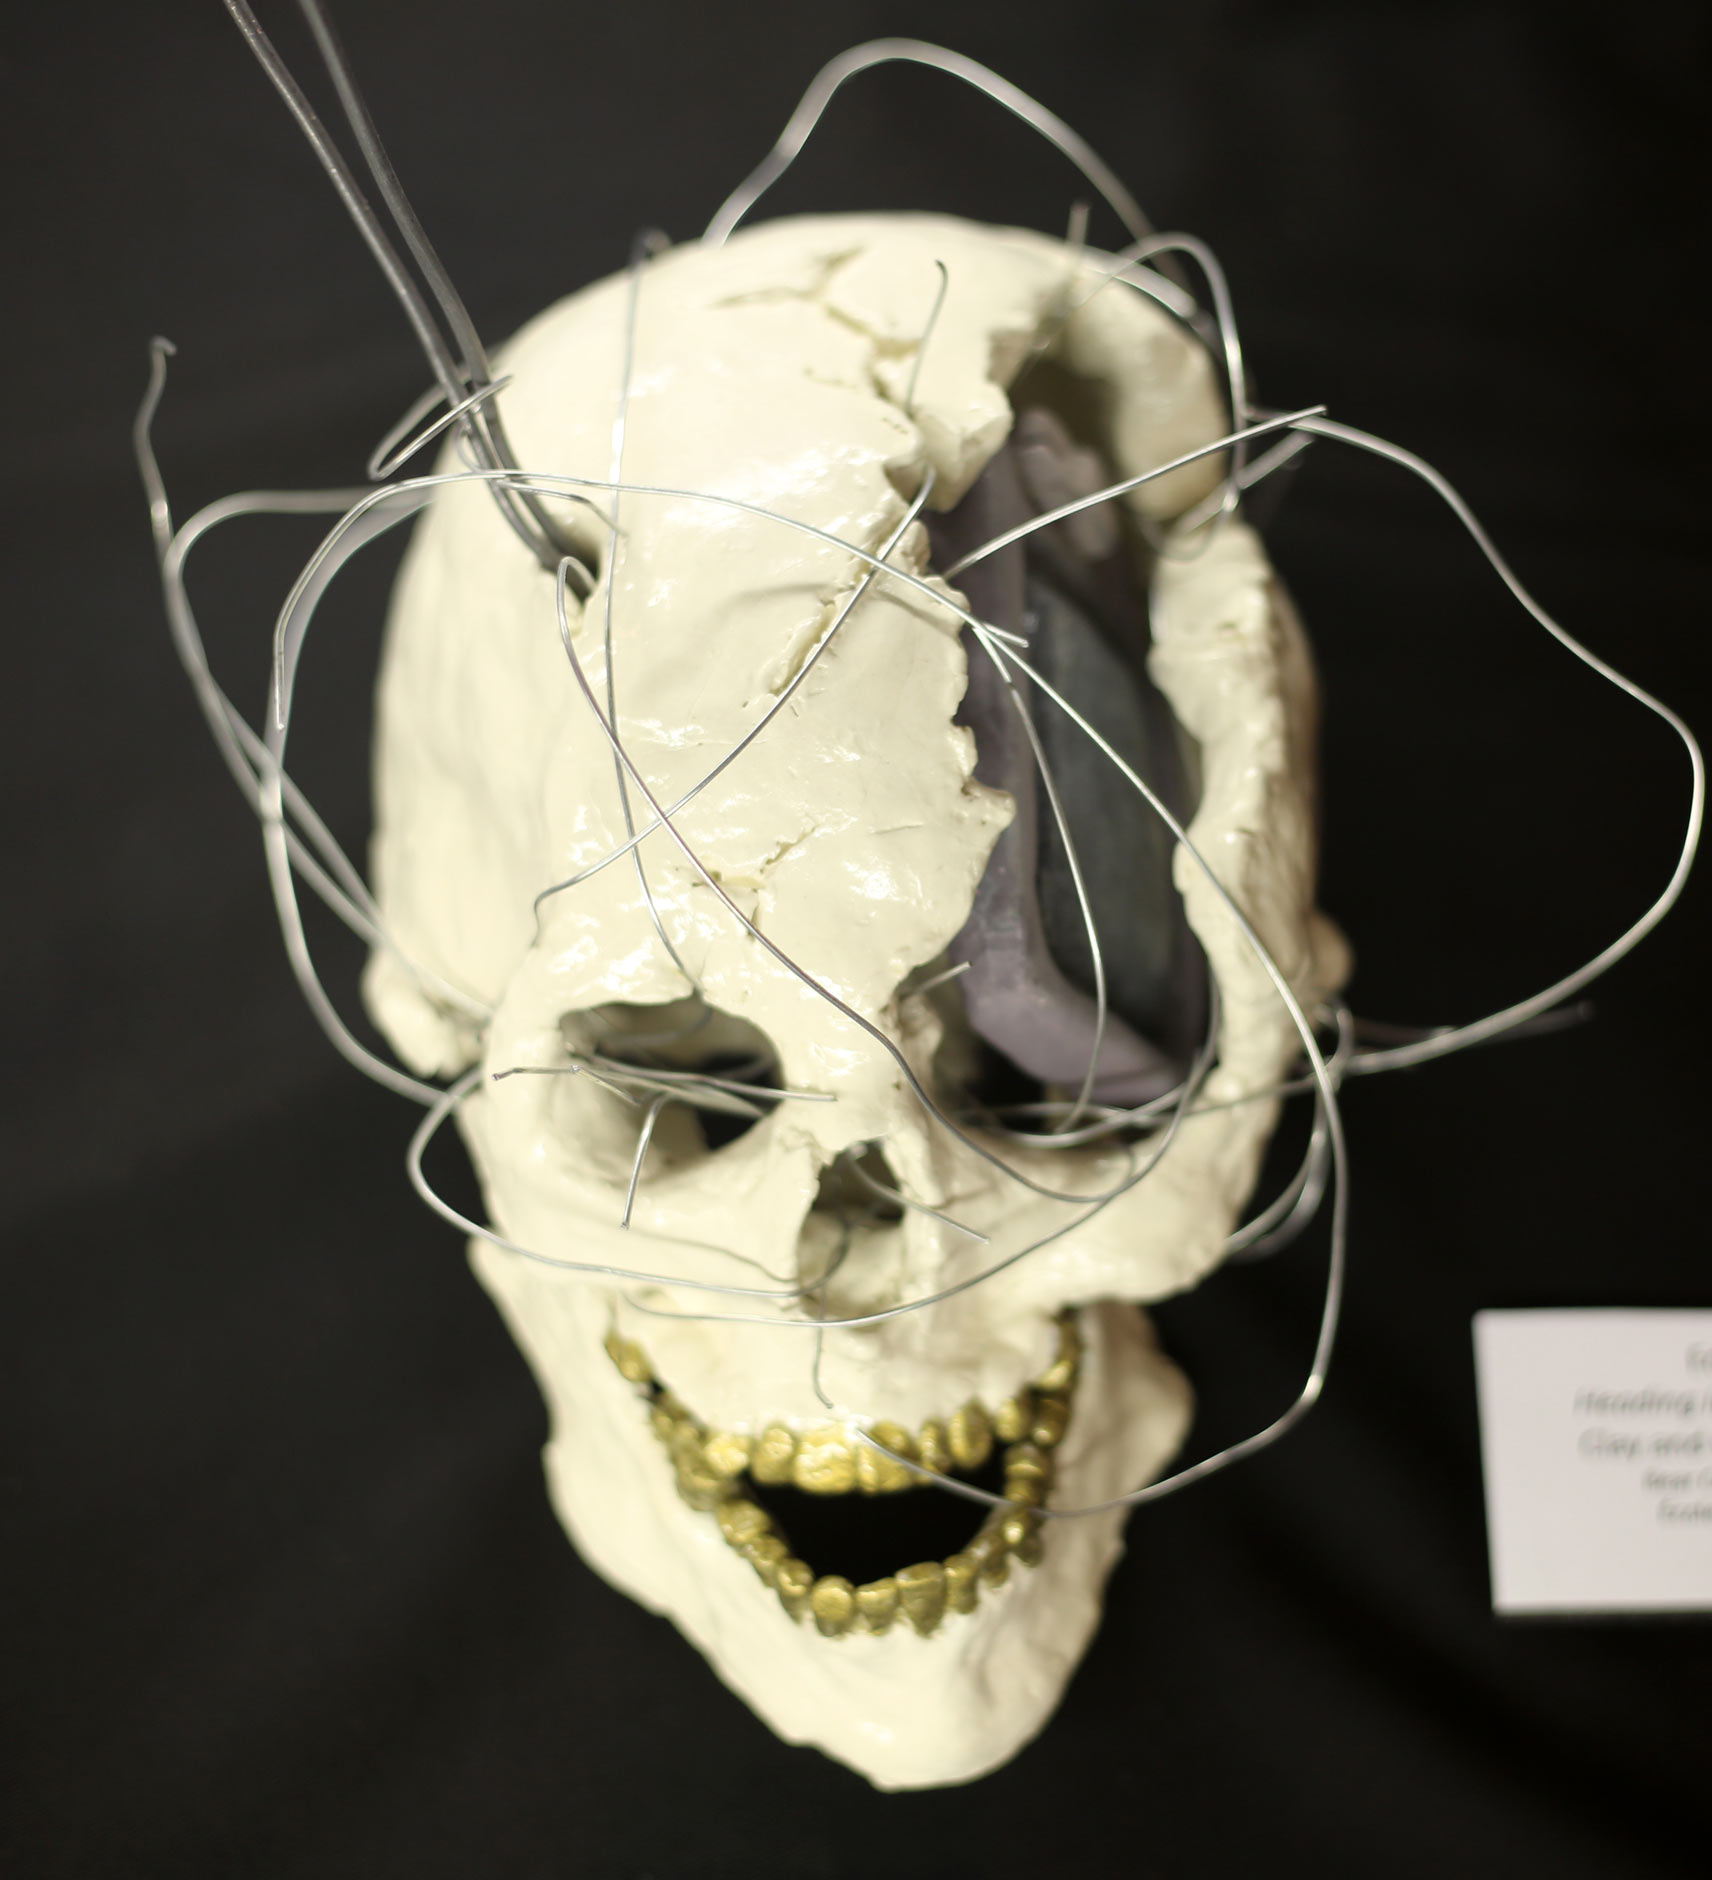 A ceramic skull and wire sculpture by a student artist in the 2015 Youth Arts Program.